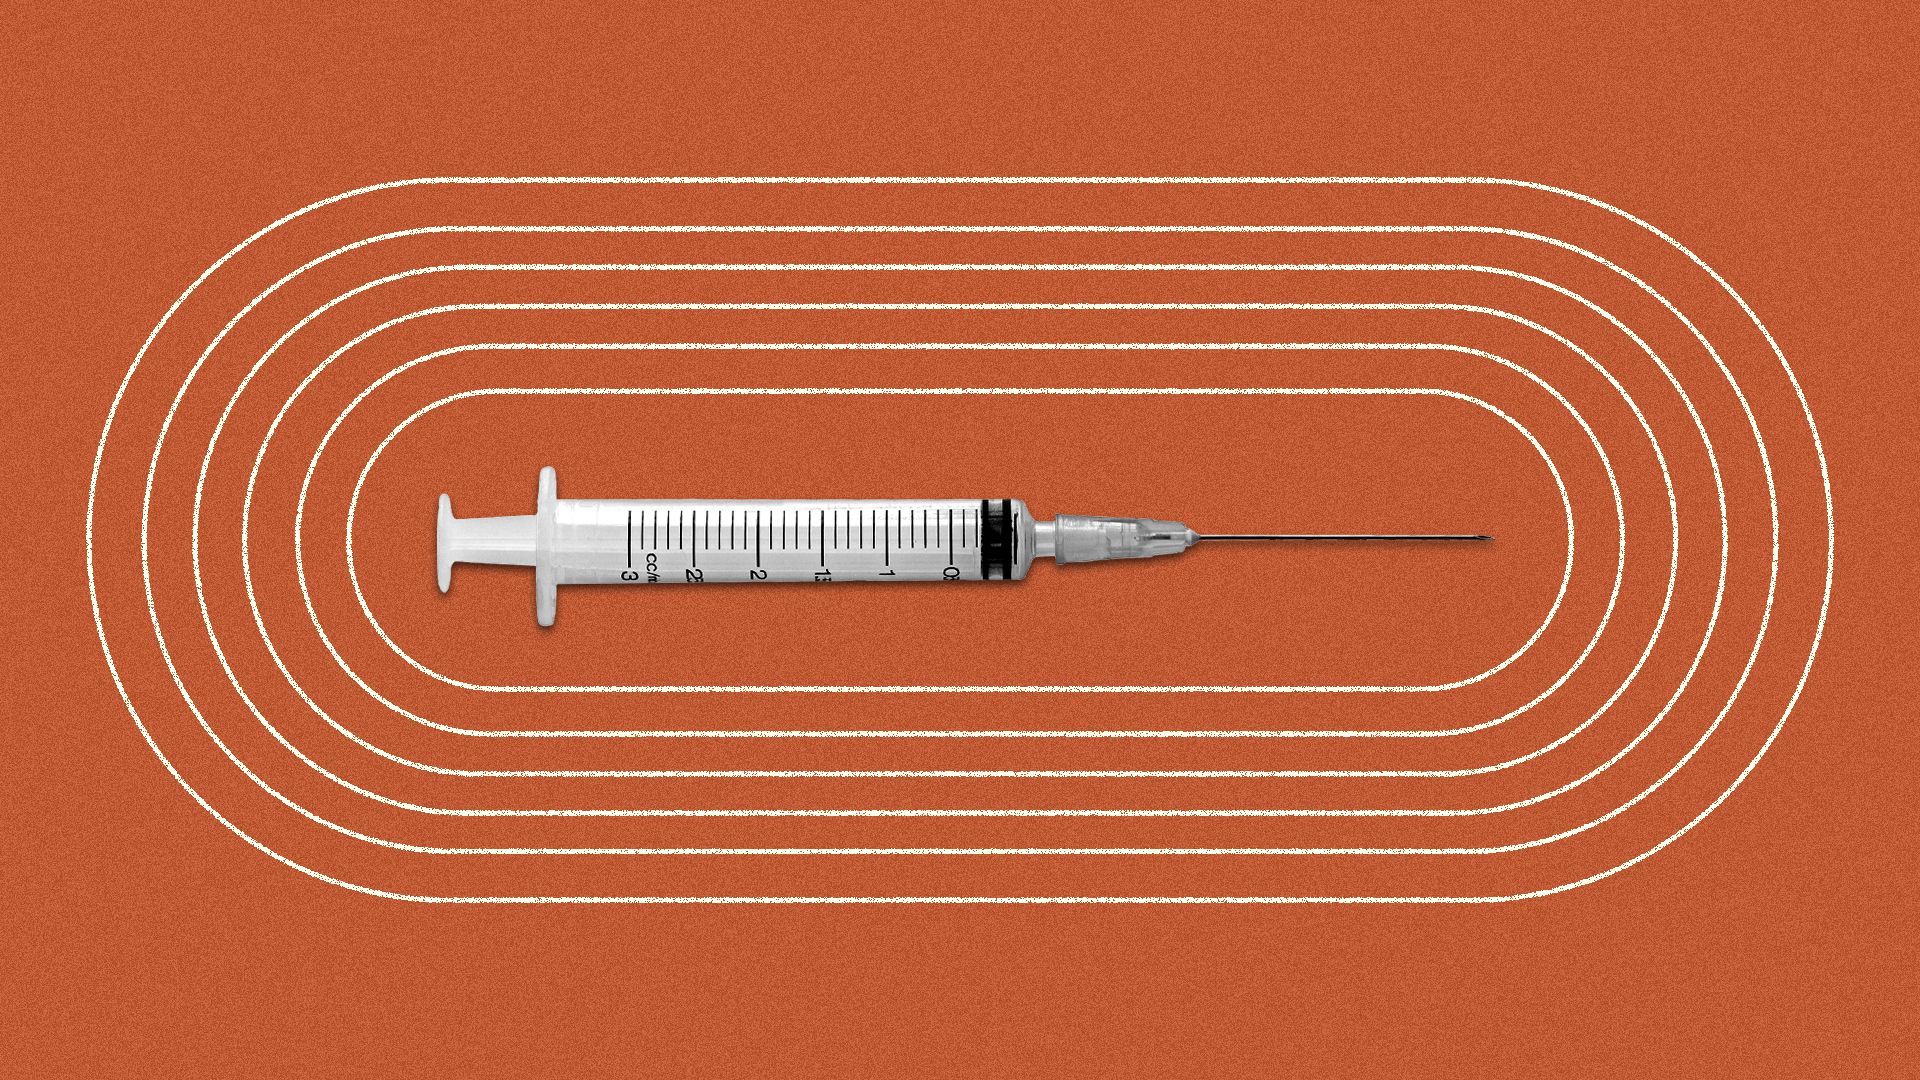 Illustration of a syringe at the center of an oval racetrack.